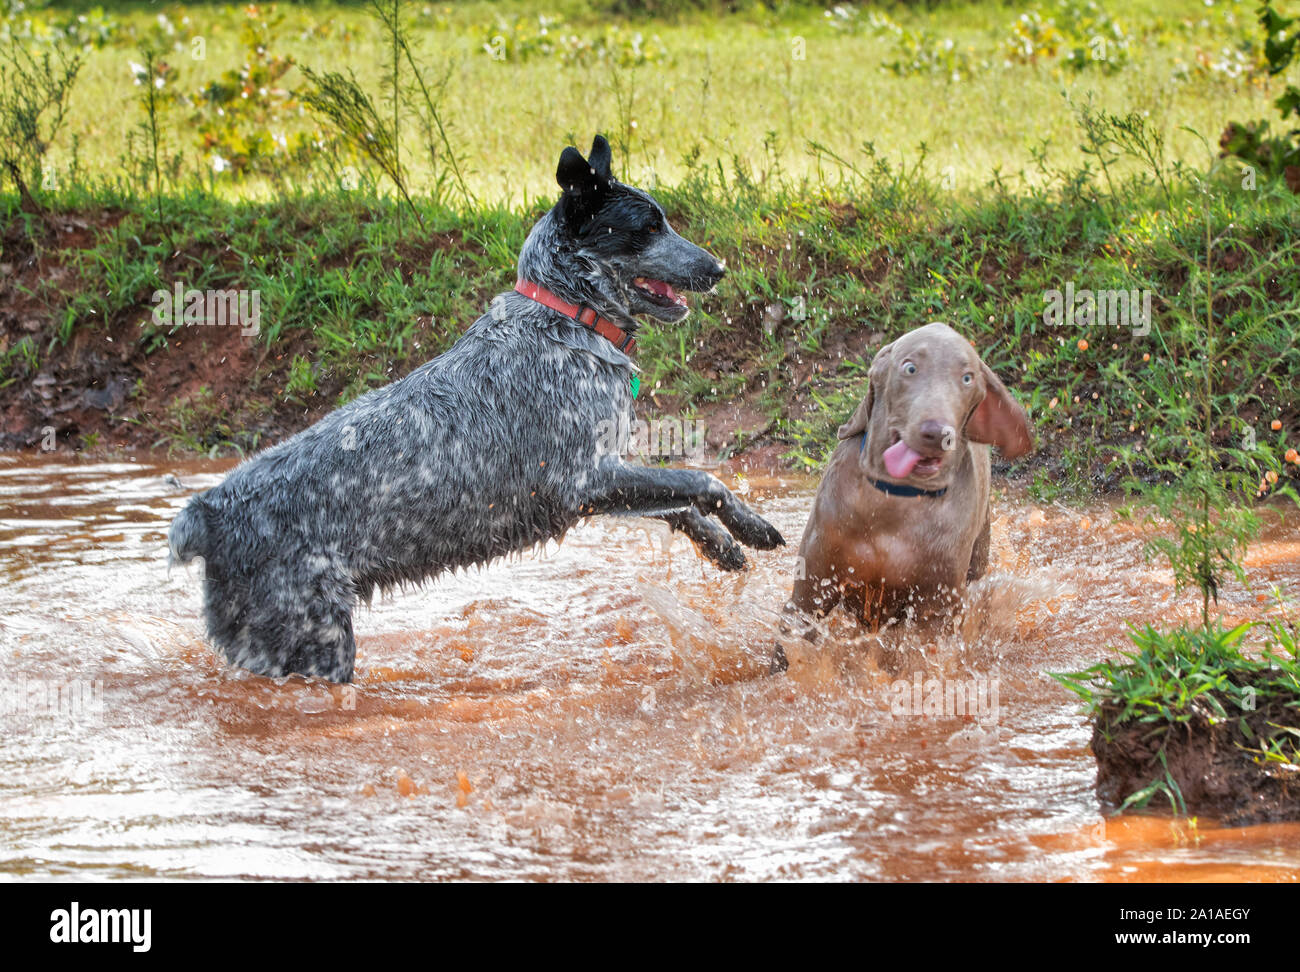 Two dogs in the middle of a muddy pond, playing hard; focus on the black and white dog Stock Photo